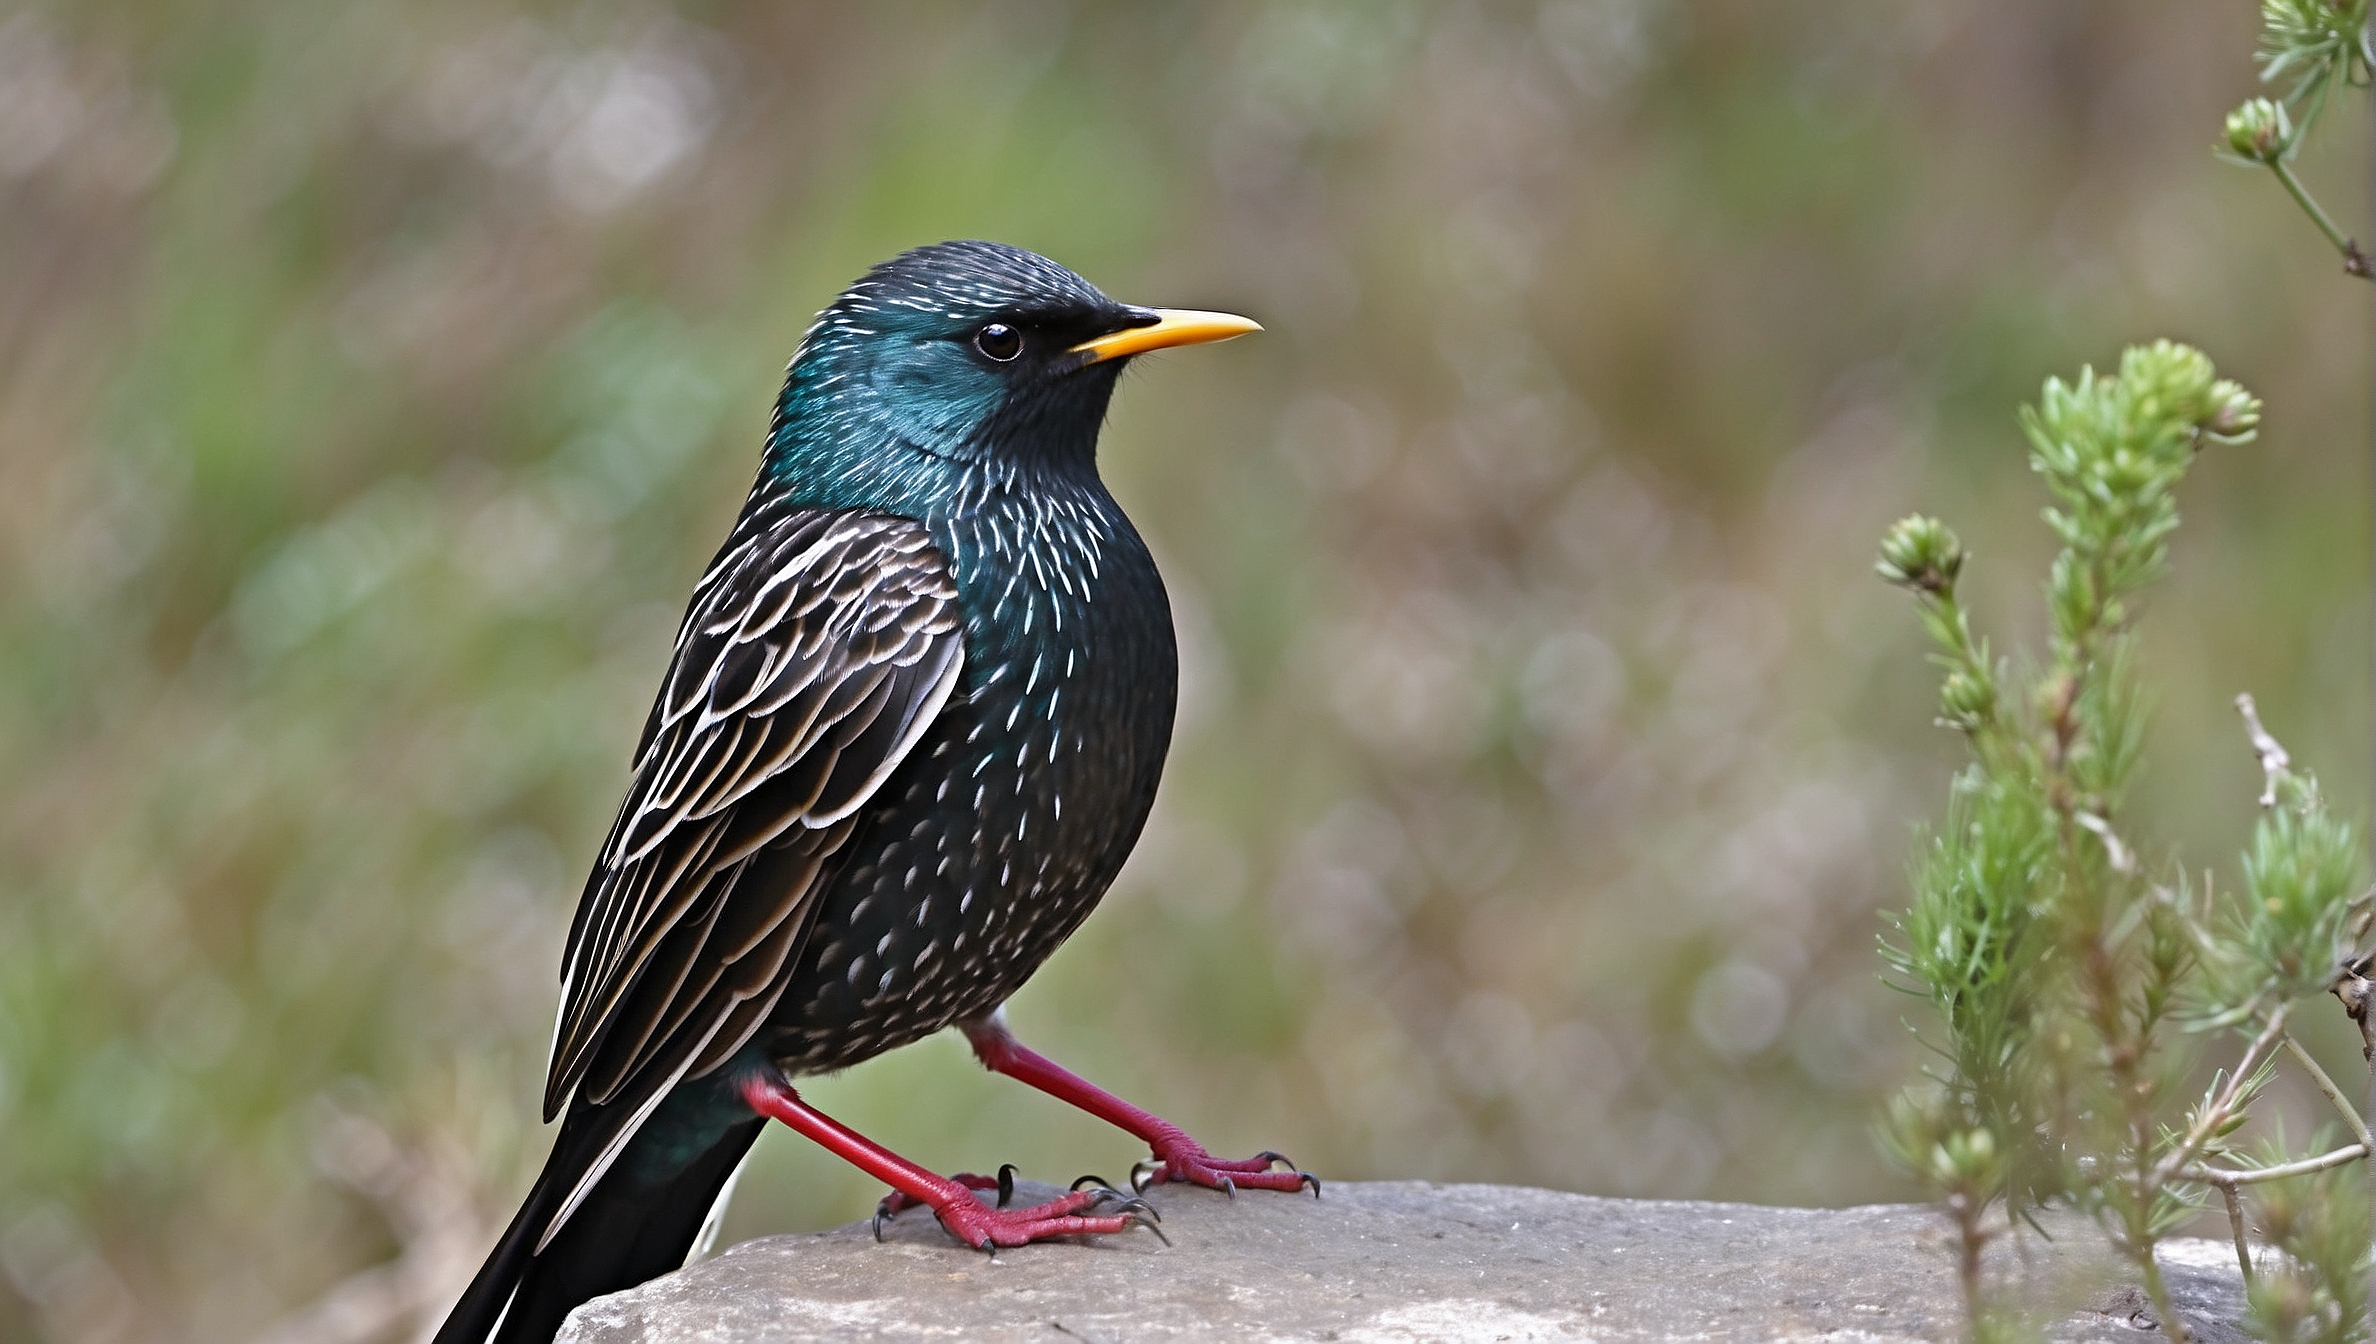 How Should You Approach An Injured Starling?